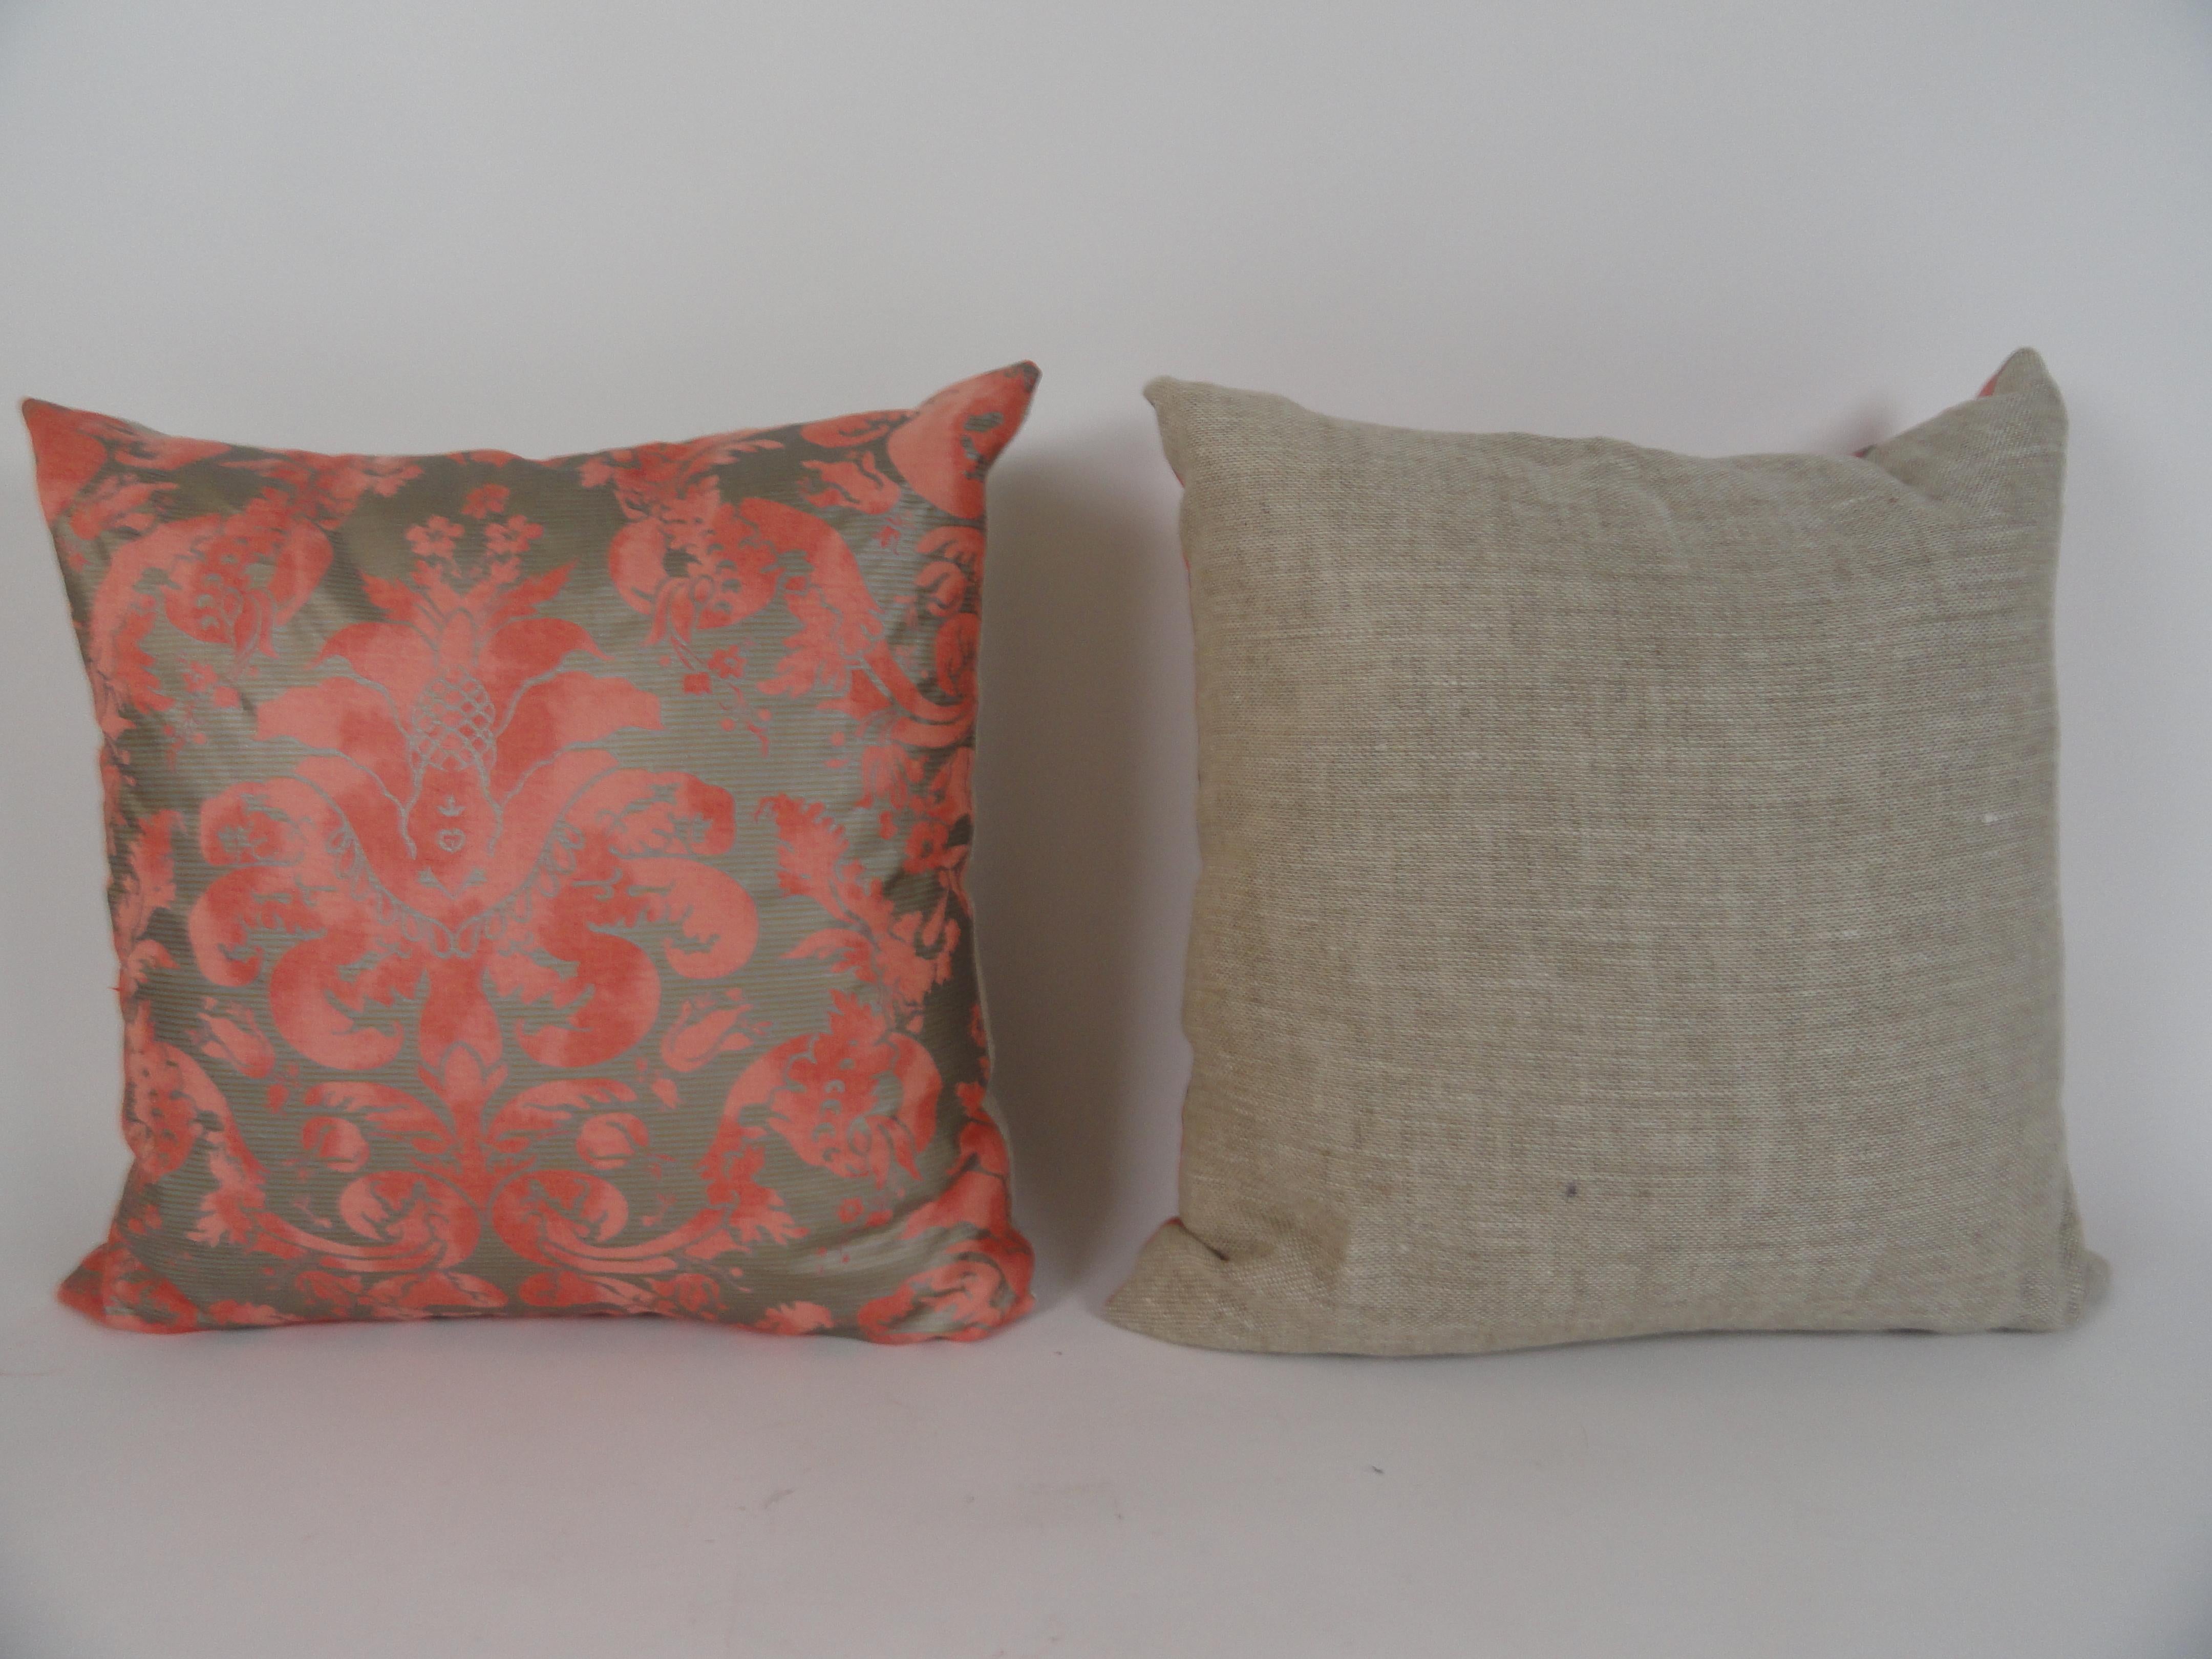 Pair of Italian cotton pillow in a Fortuny style pattern. Backed in a Scalamandre linen. 24